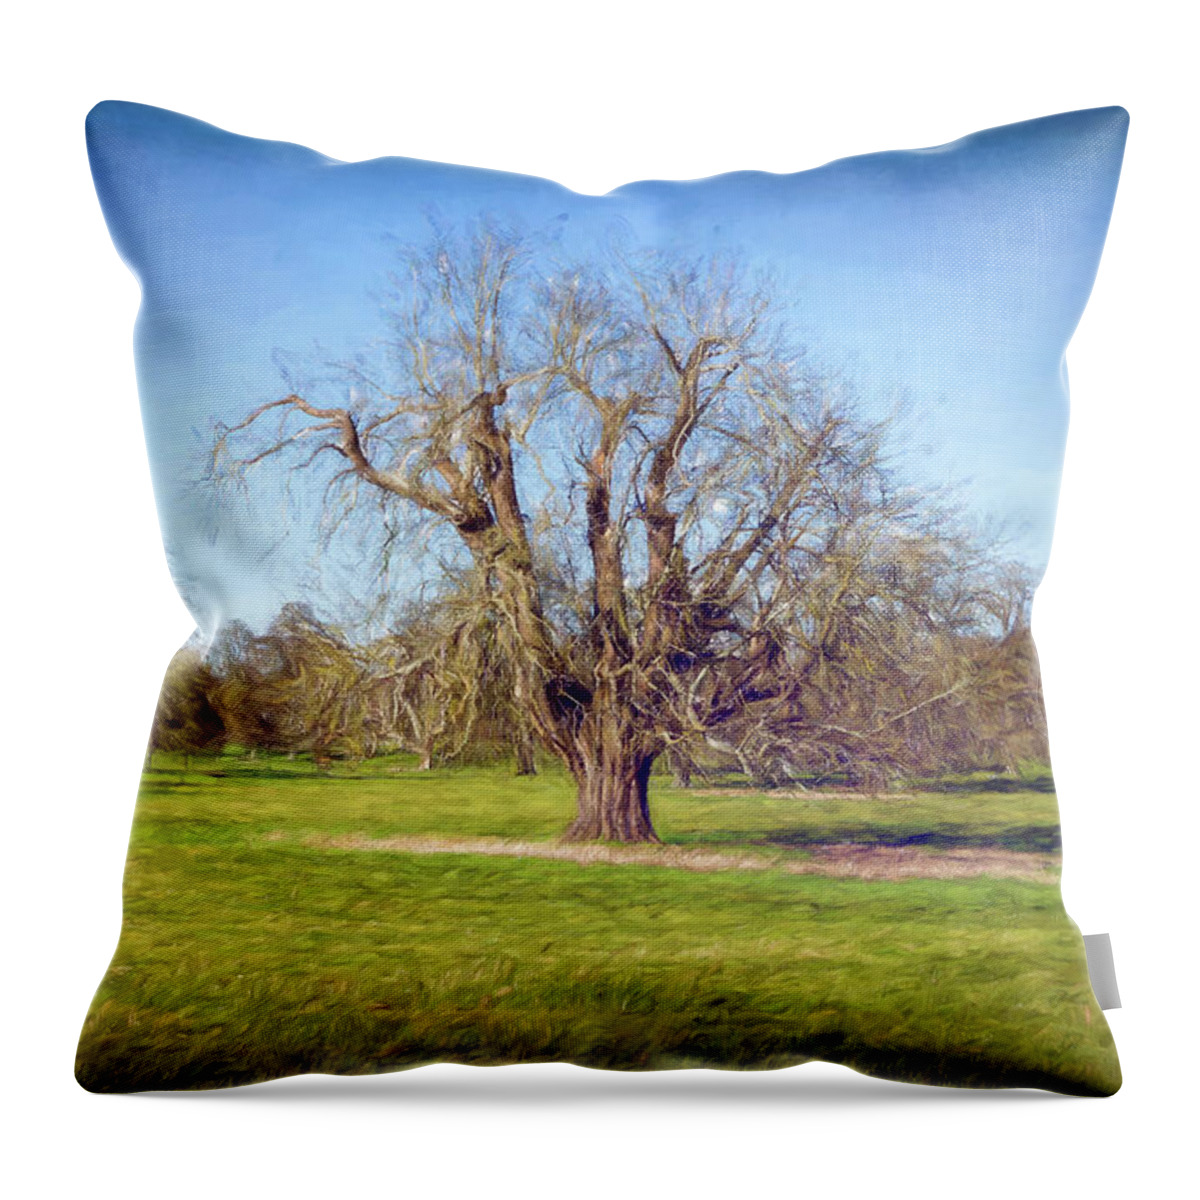 Oak Tree Throw Pillow featuring the photograph Painted Winter Oak by Tanya C Smith